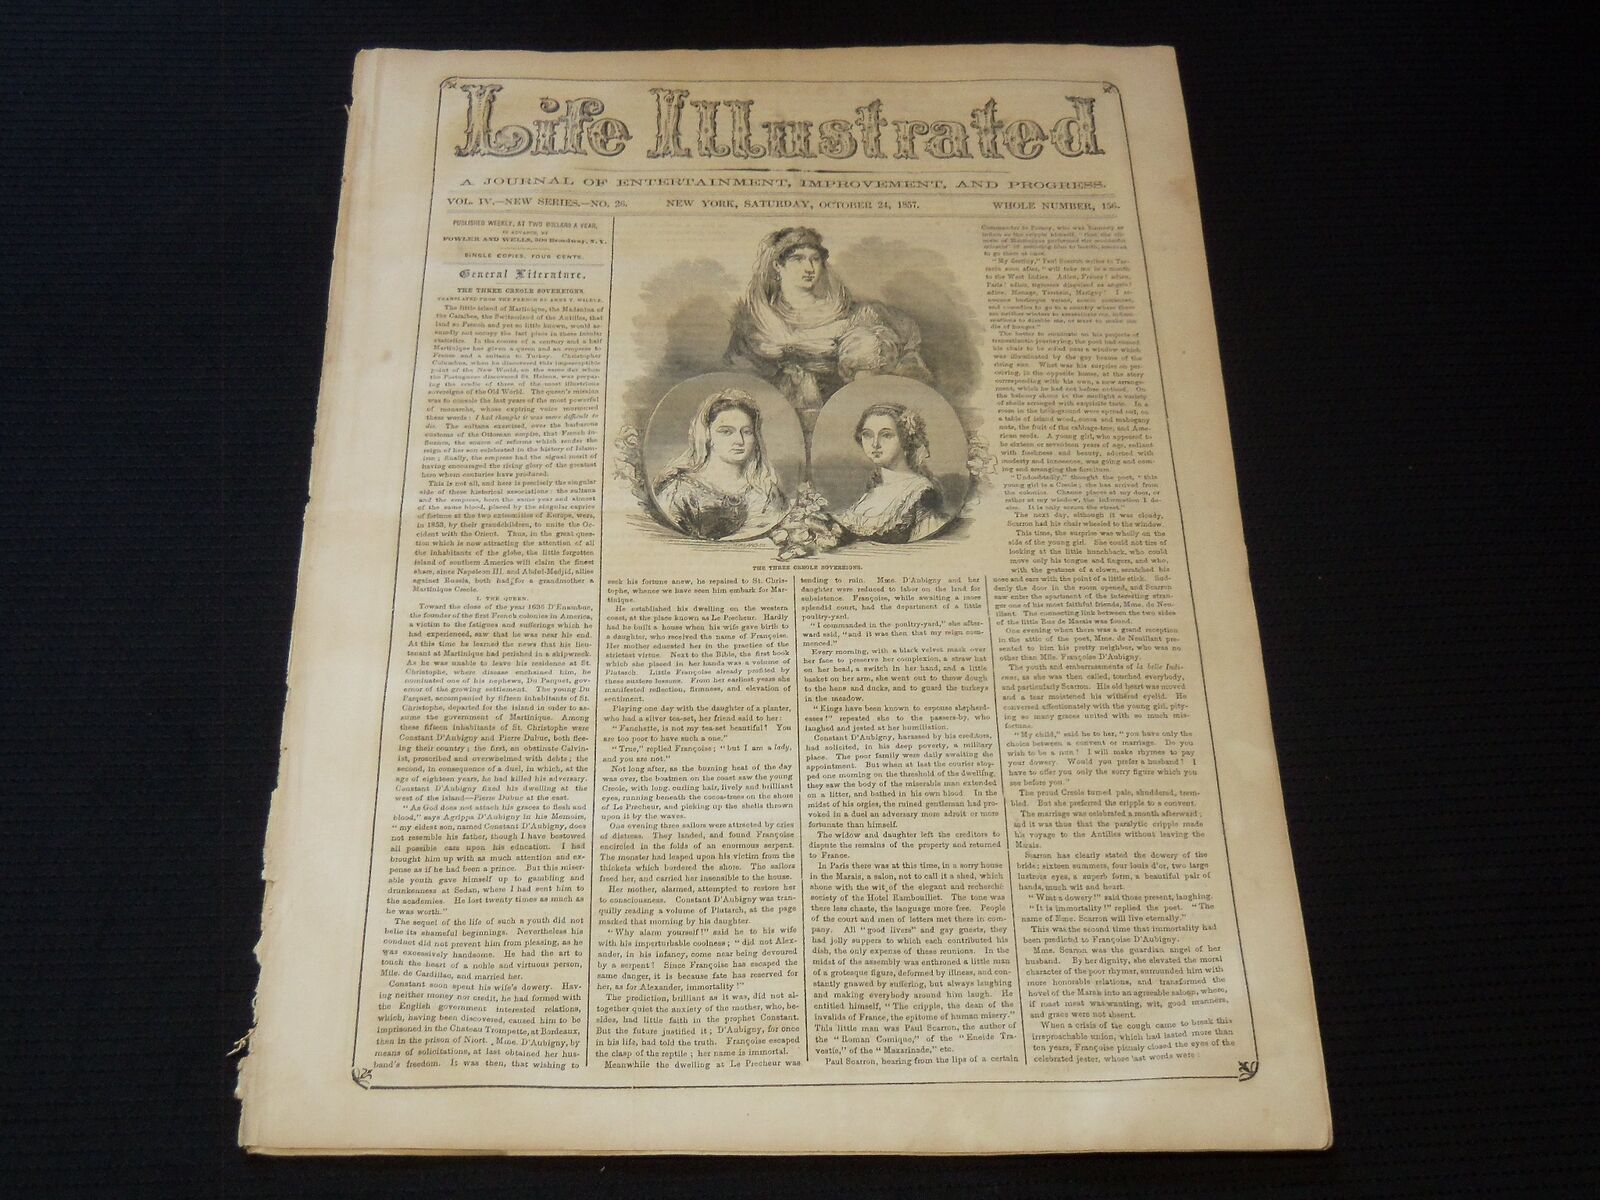 1857 OCTOBER 24 LIFE ILLUSTRATED NEWSPAPER - THREE CREOLE SOVERIGNS - NP 5913